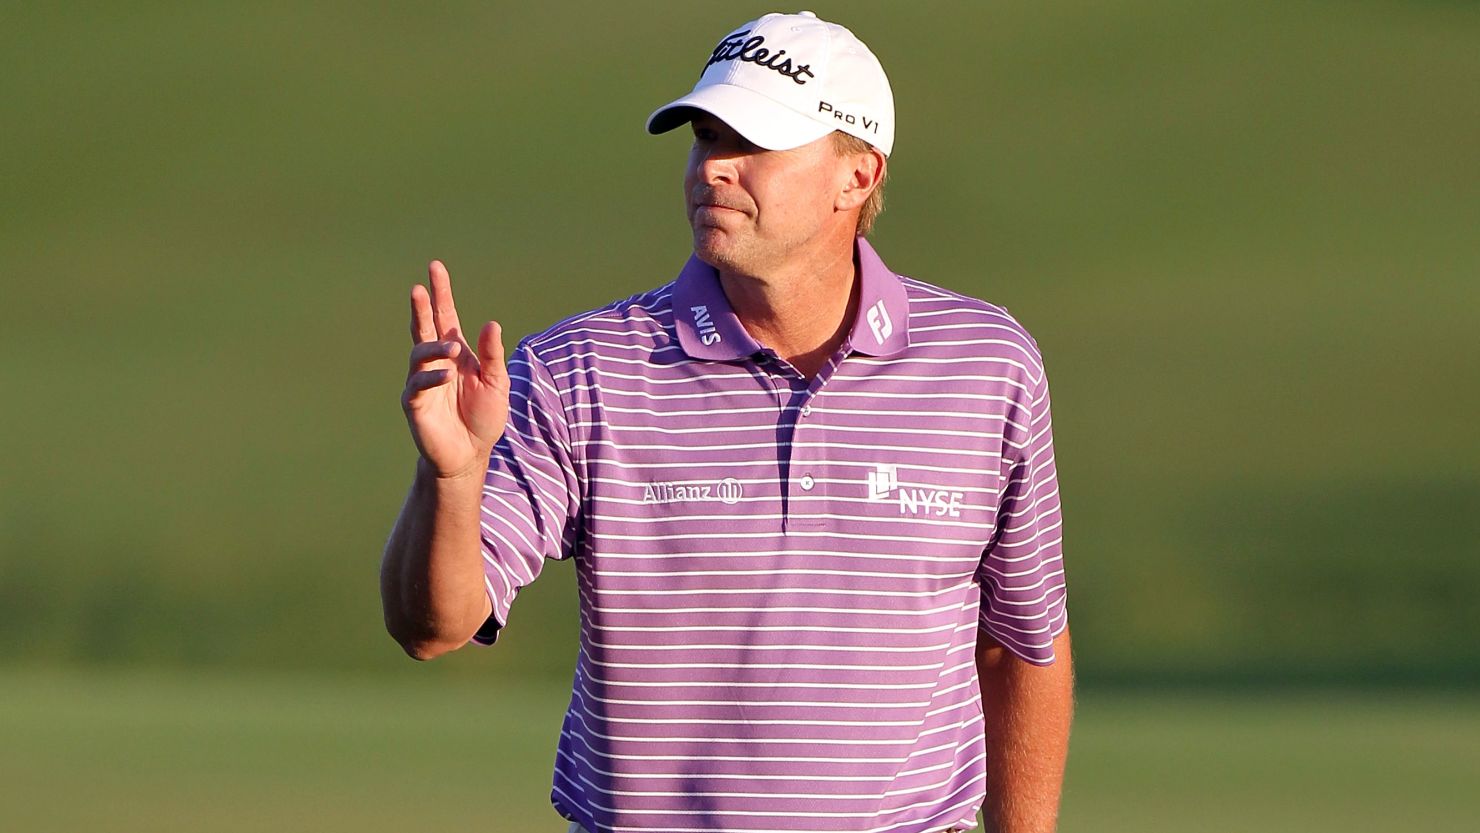 American golfer Steve Stricker has claimed 11 PGA Tour titles since turning pro in 1990.